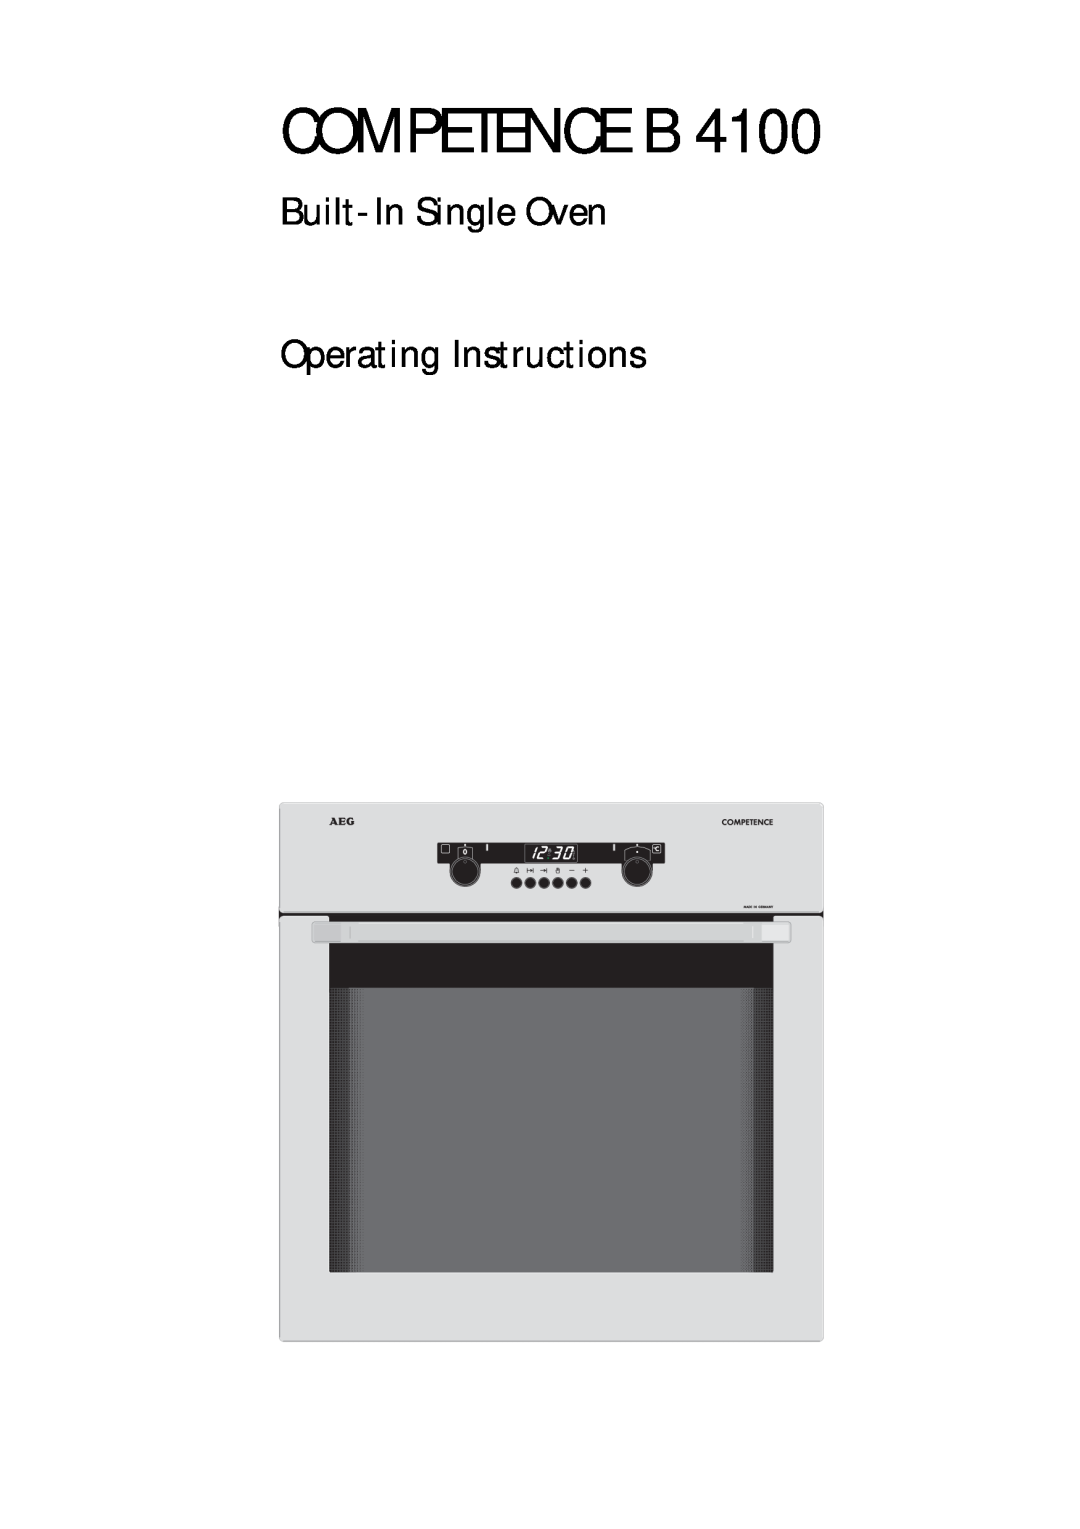 Electrolux B 4100 manual Competence B, Built-In Single Oven Operating Instructions 